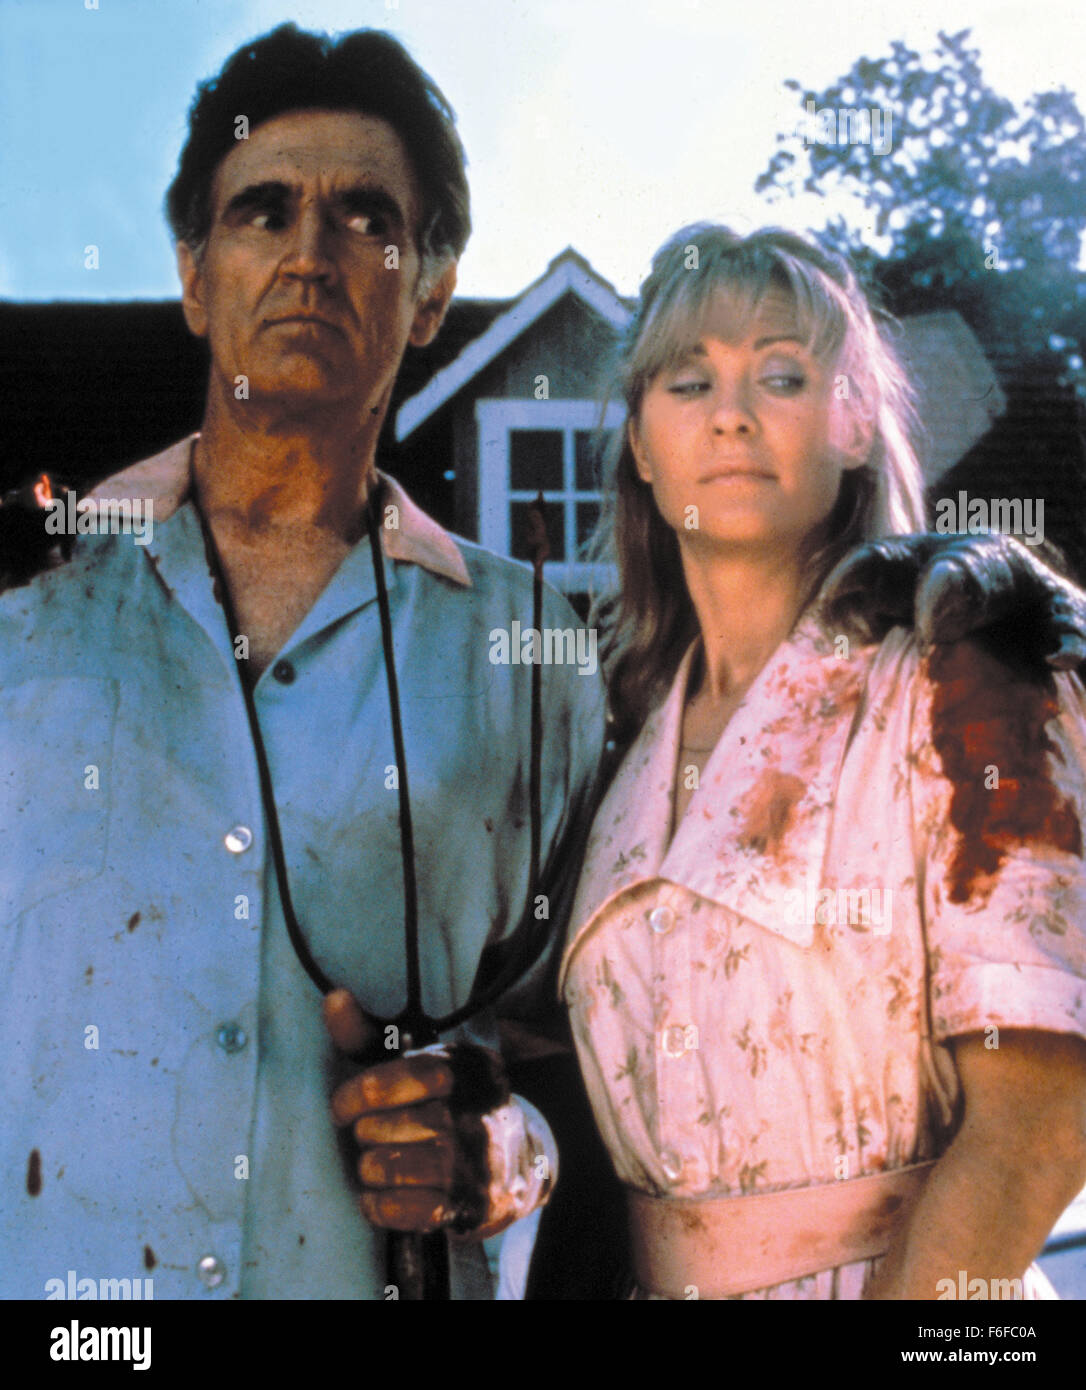 RELEASE DATE: April 11, 1986. MOVIE TITLE: Critters. STUDIO: New Line Cinema. PLOT: A  massive ball of furry creatures from another world eat their way through a small mid-western town followed by intergalactic bounty hunters opposed only by militant townspeople. PICTURED: BILLY GREEN BUSH as Jay Brown, DEE WALLACE as Helen Brown. Stock Photo